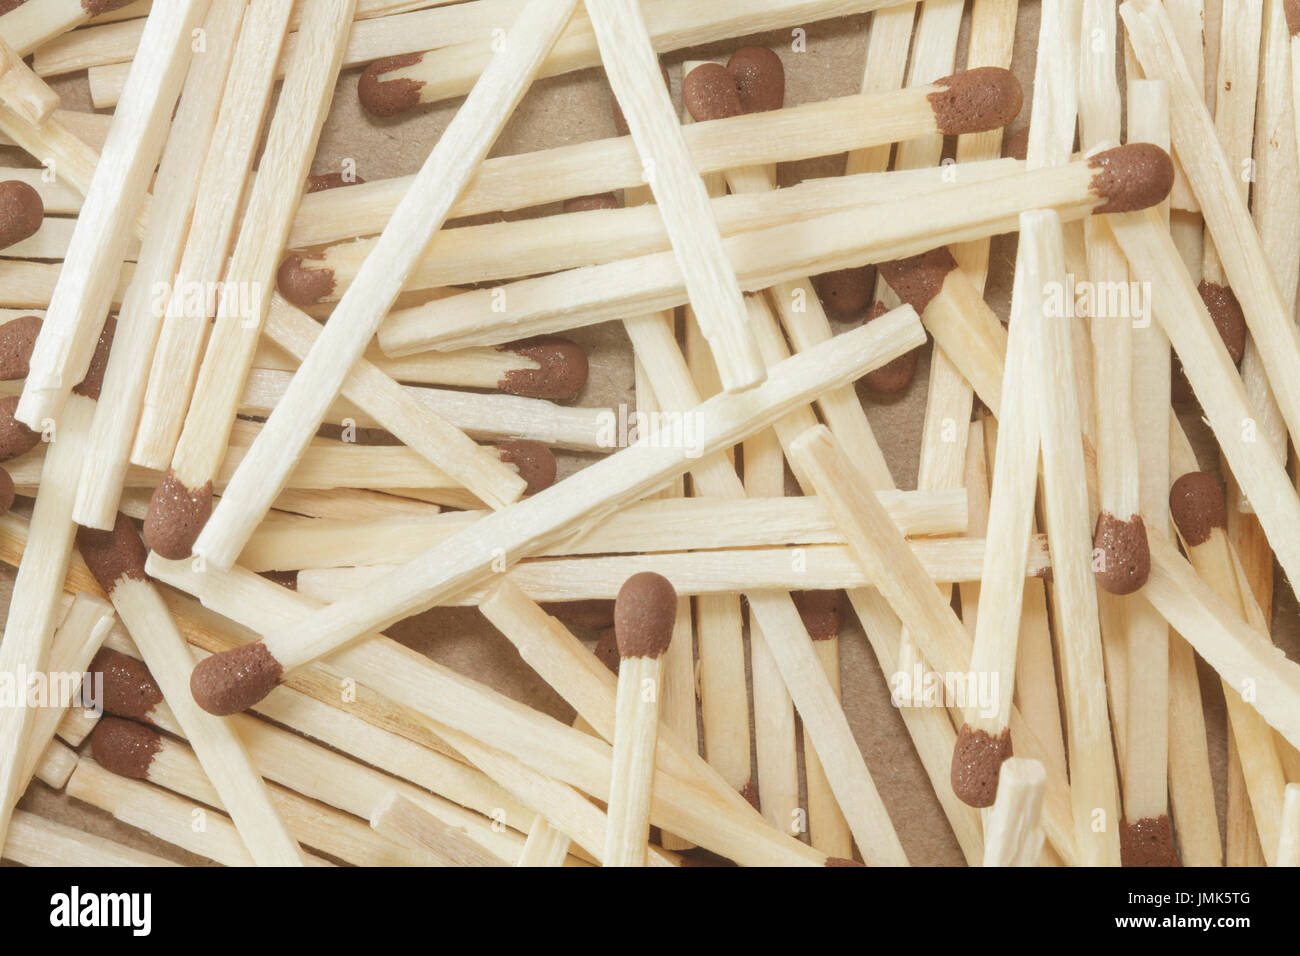 Wooden matches with brown heads closeup Stock Photo